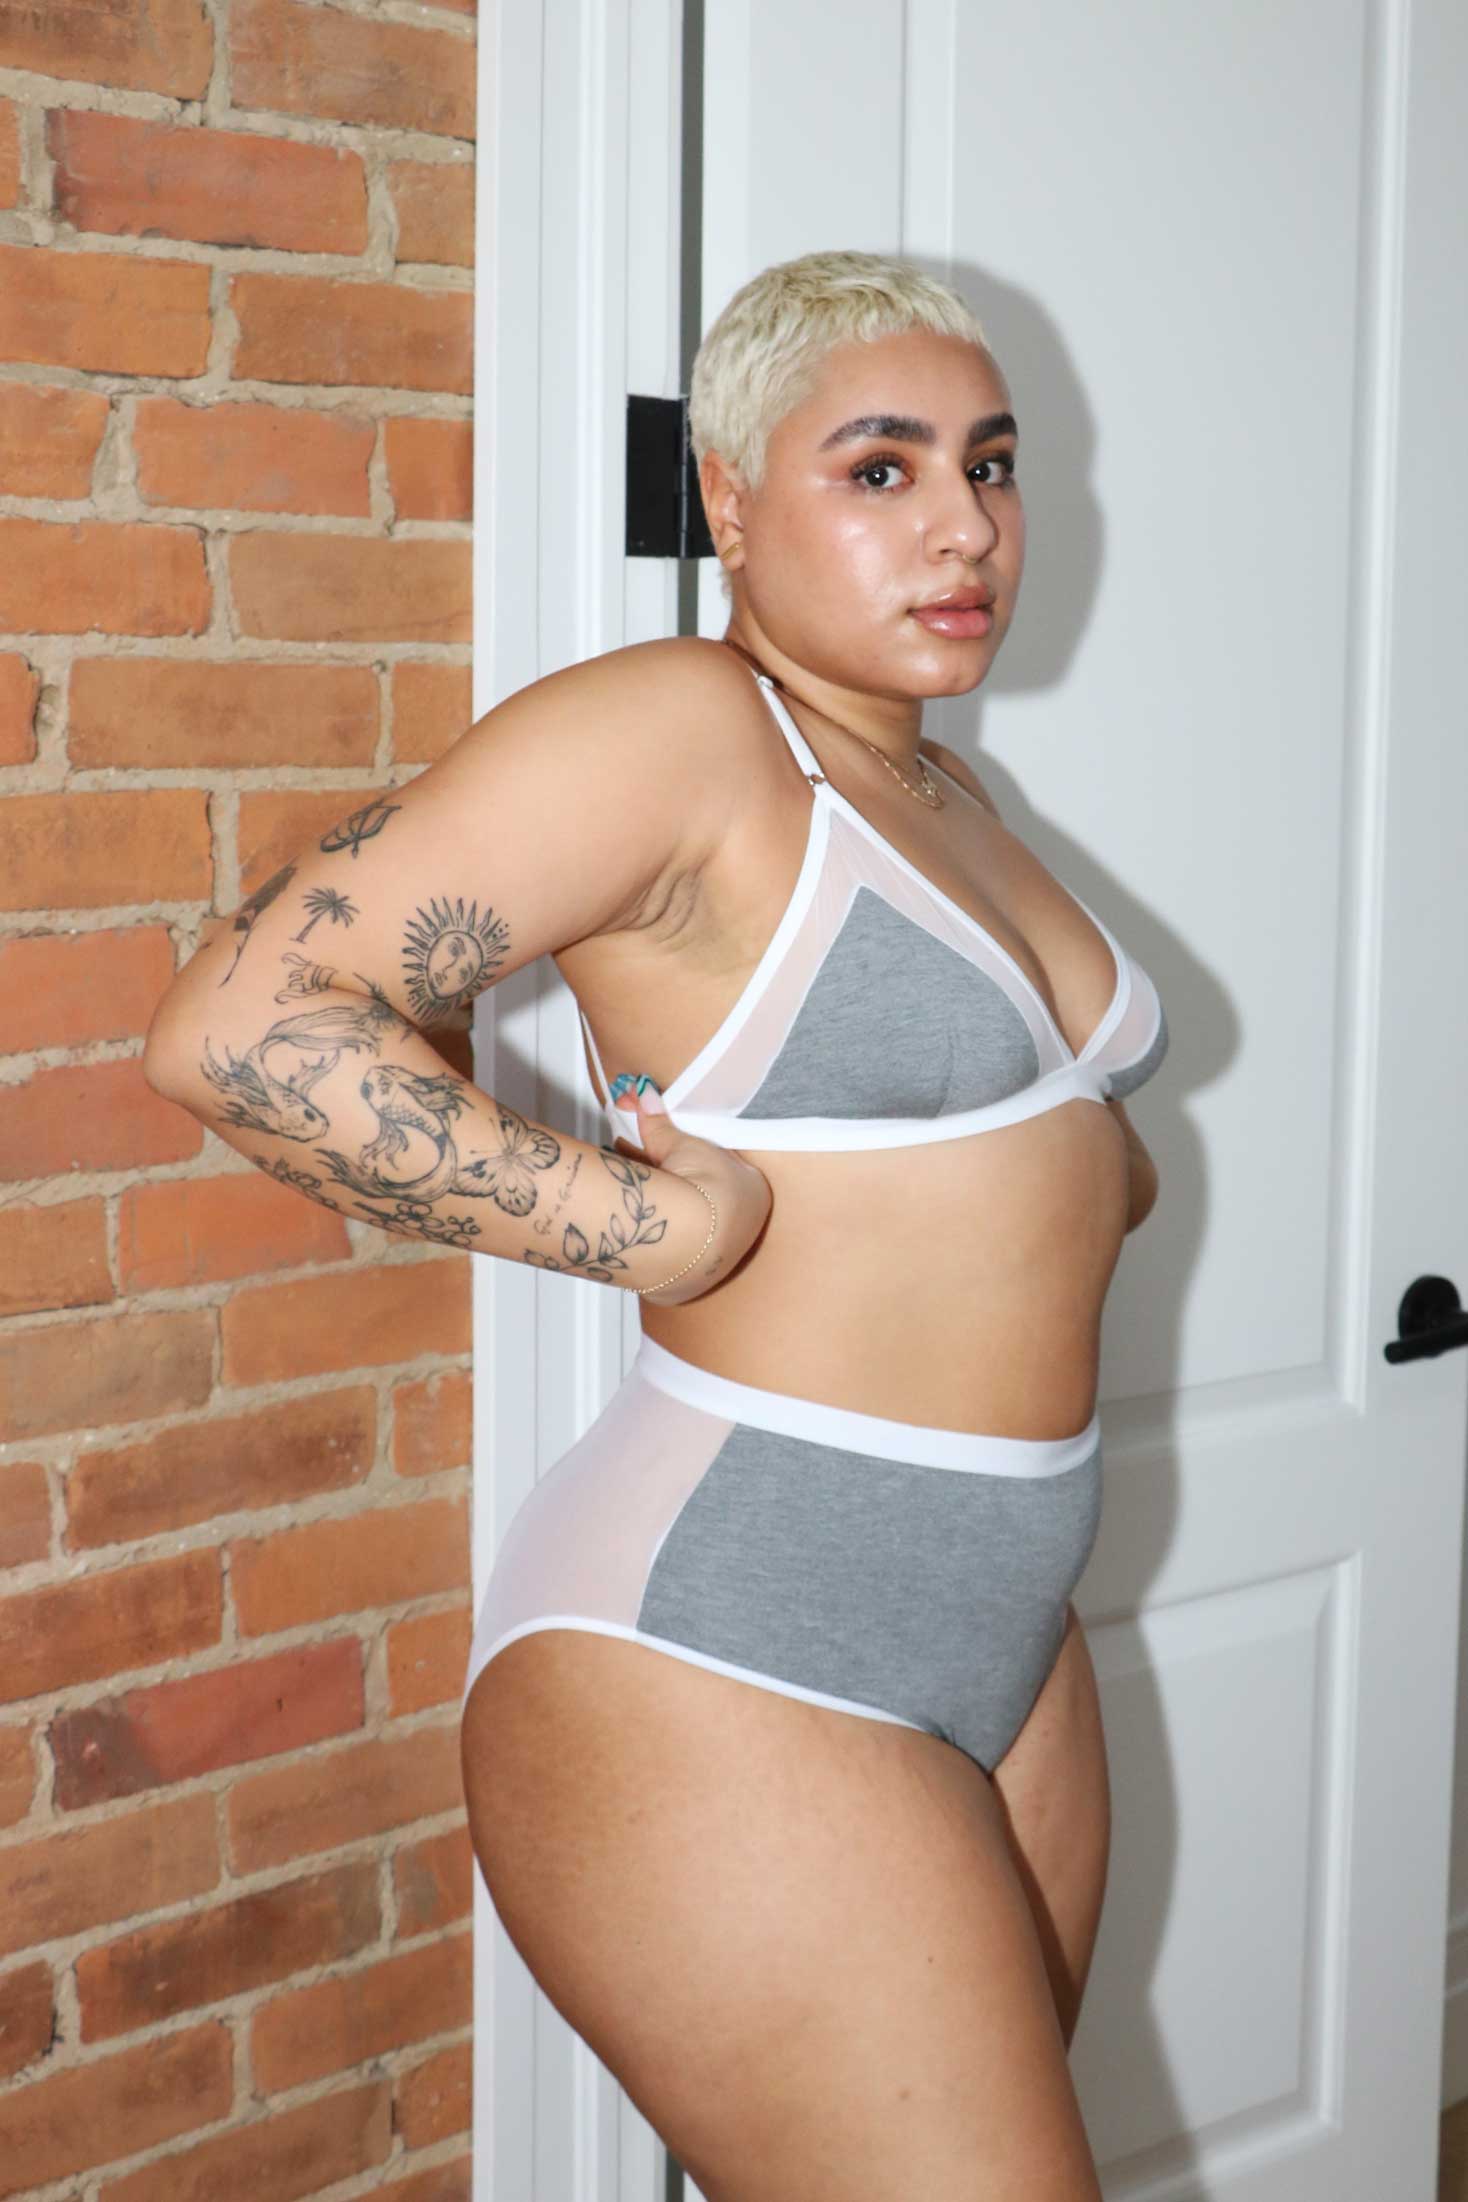 Lux High Waist Brief in Grey - MARY YOUNG